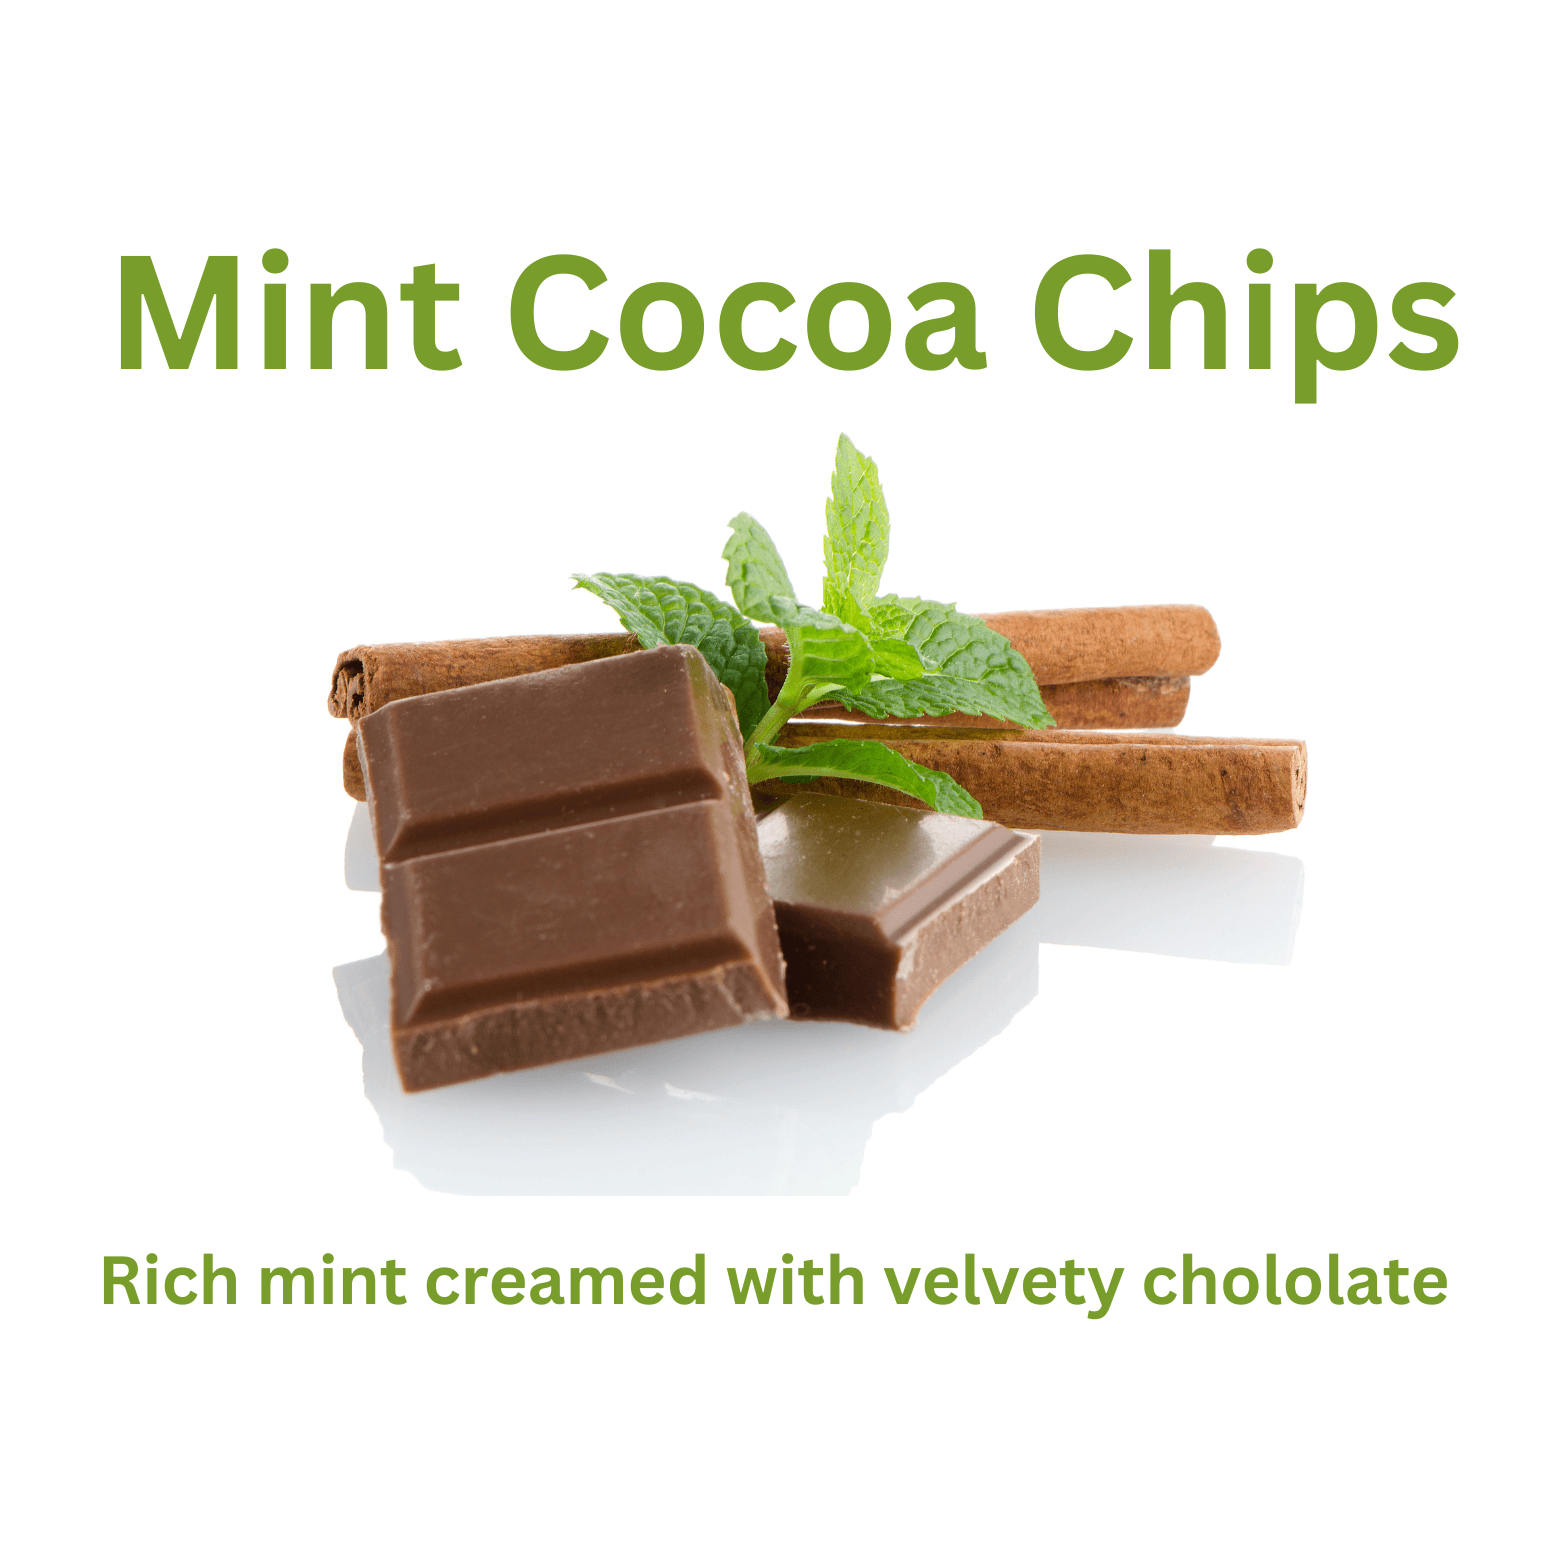 Mint Cocoa Chips - WaxettyMint Cocoa ChipsWax Melt